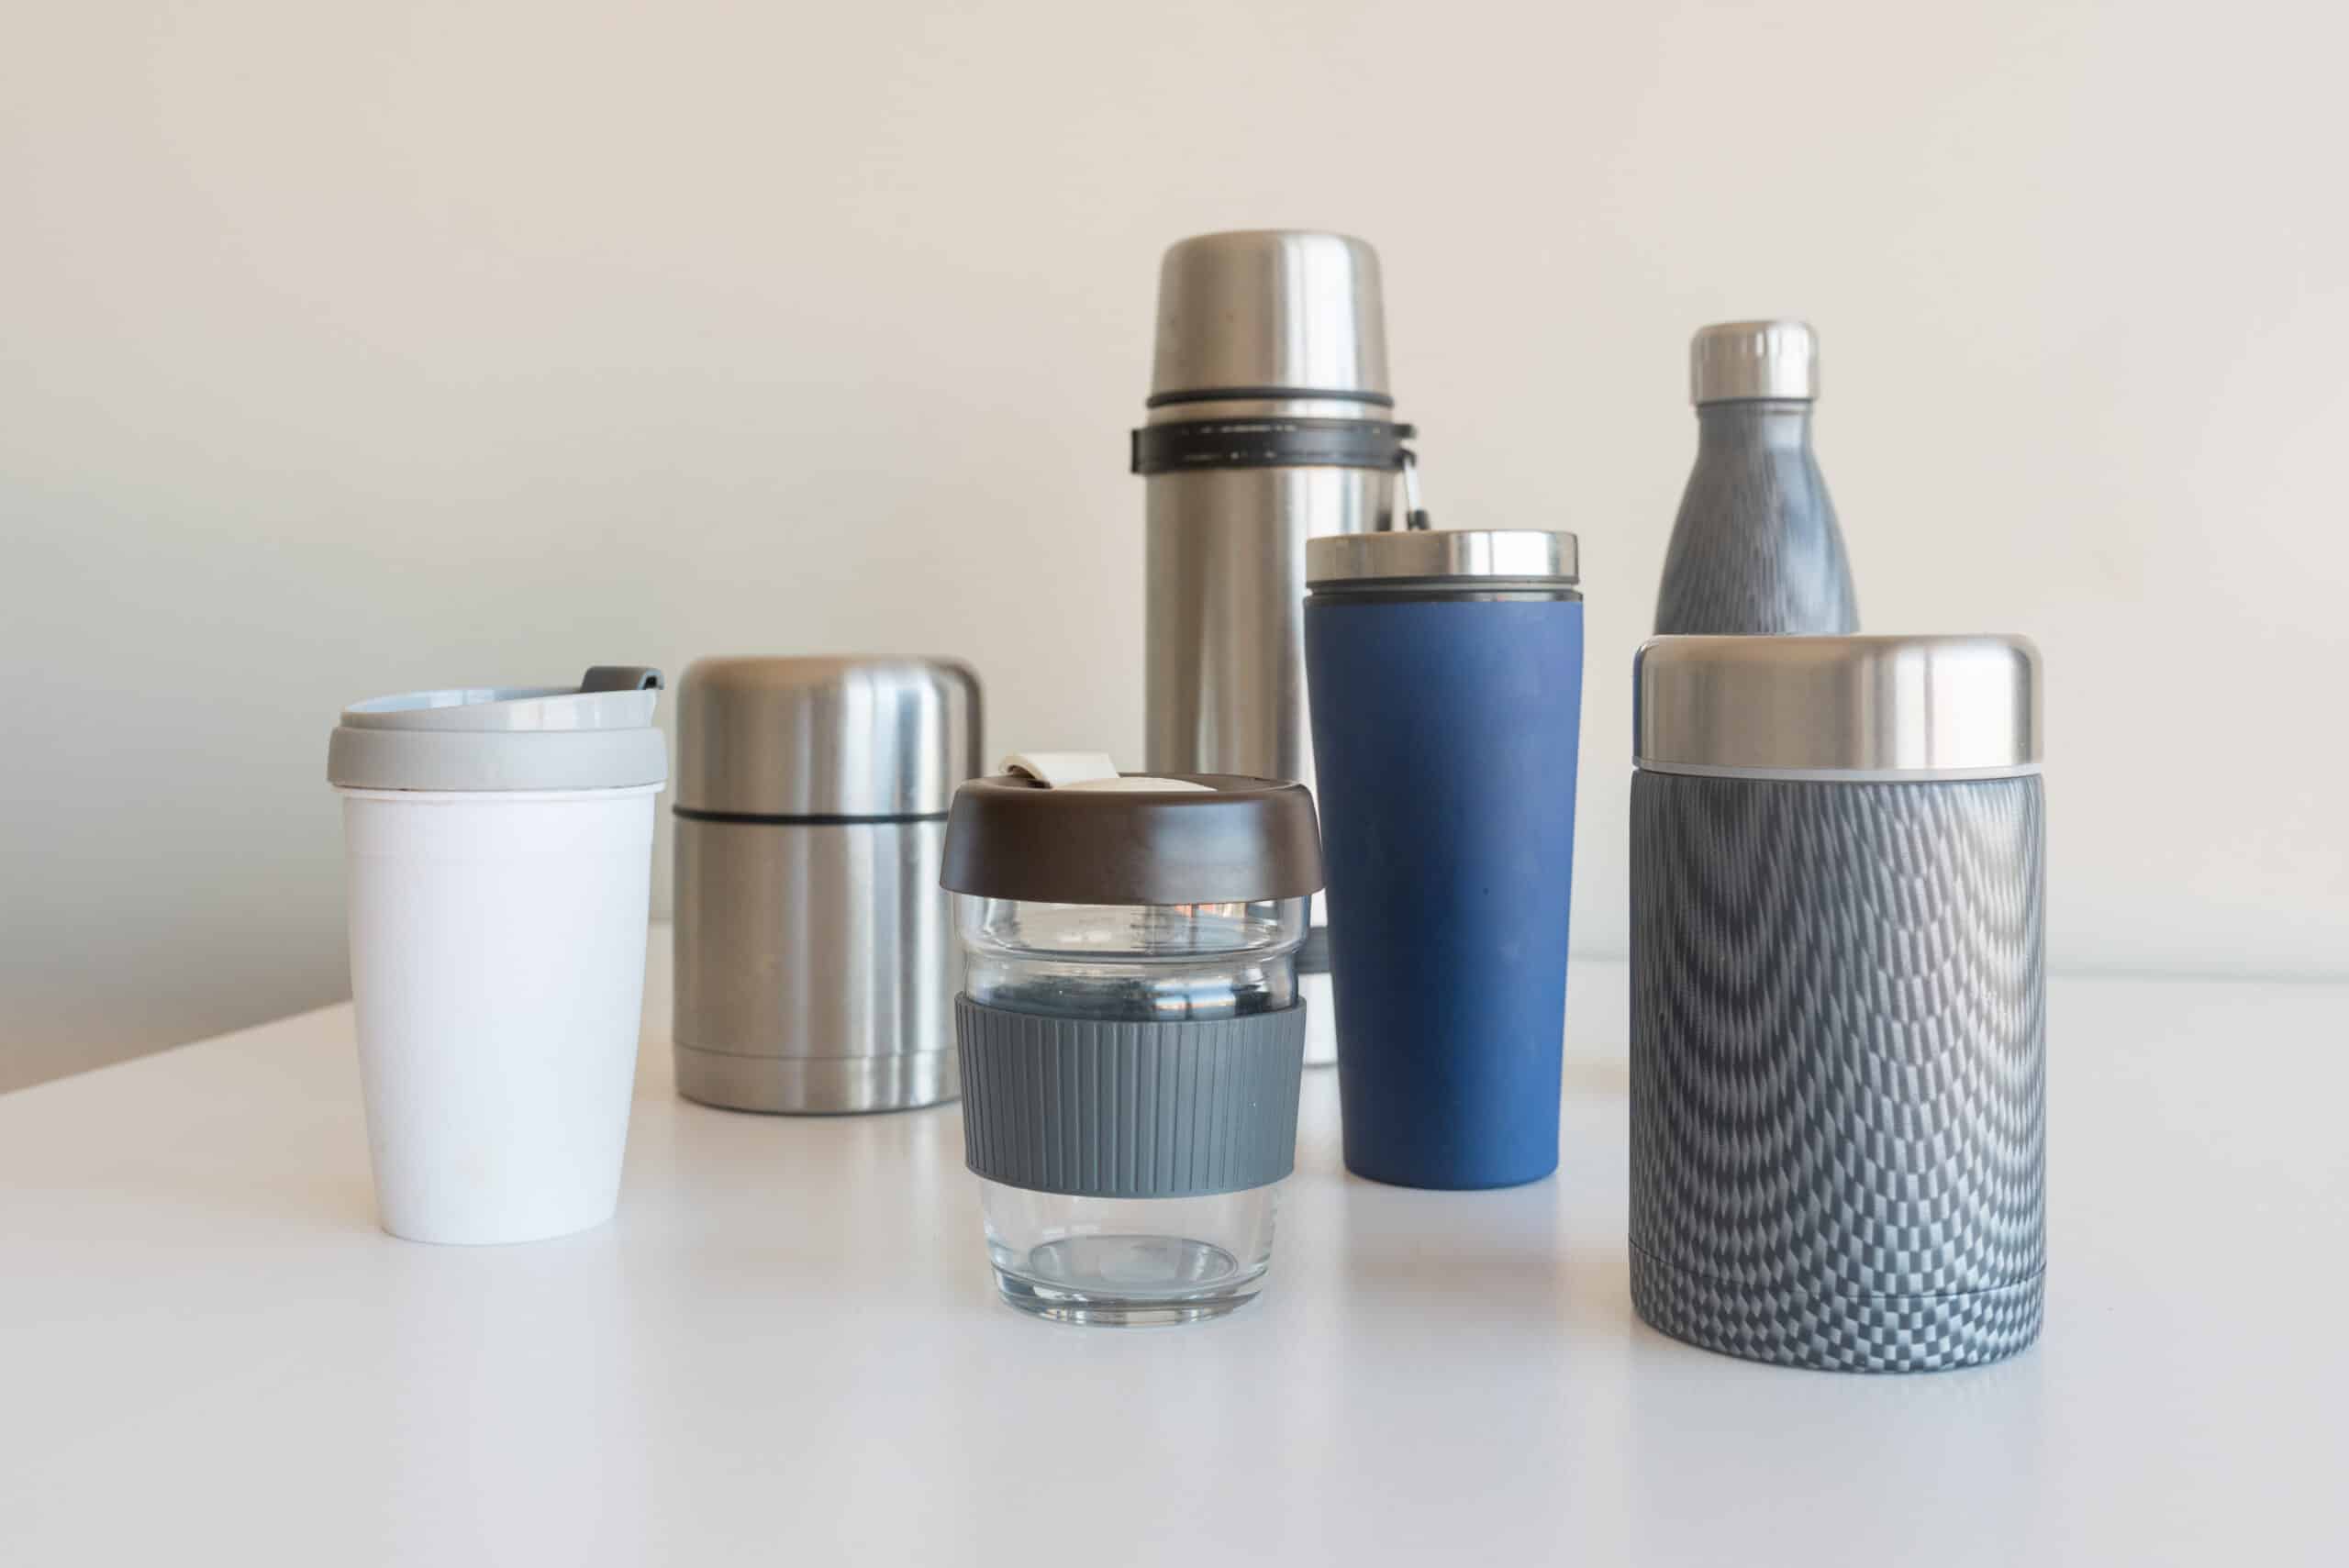 Why is Everyone so Against Reusable Bottles?